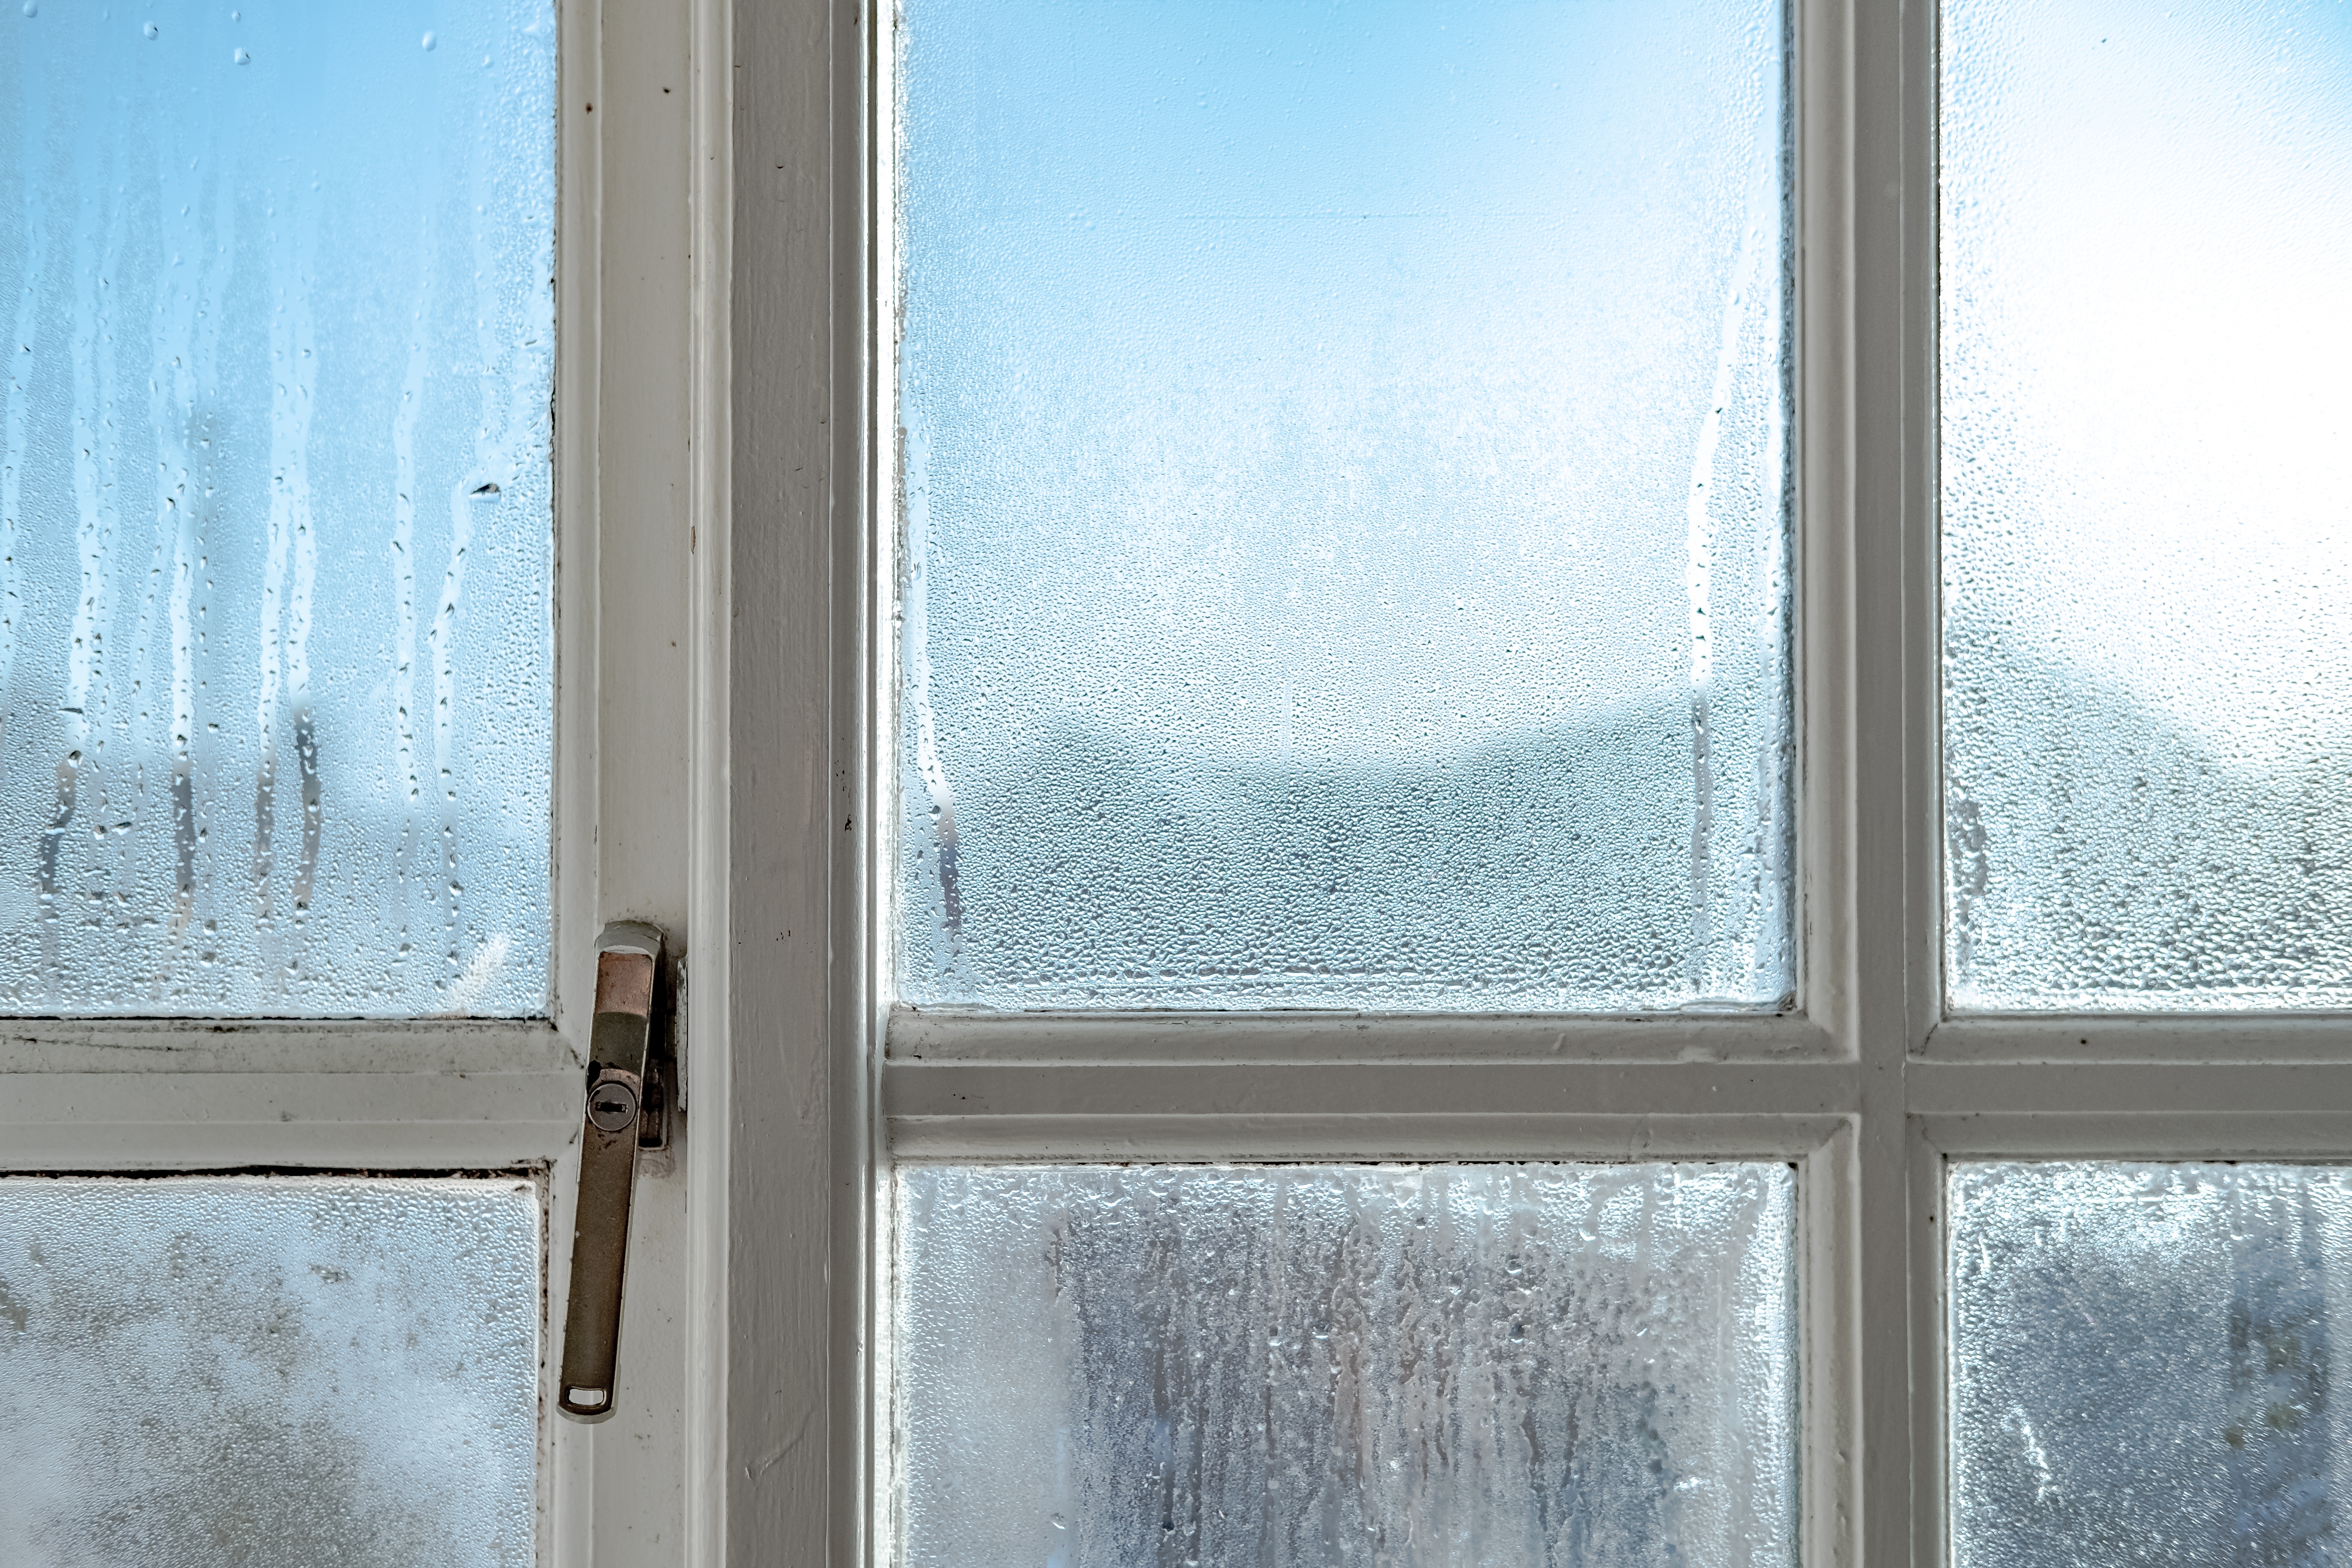 Upgrading your windows or installing a window insulation film can help to reduce heat loss